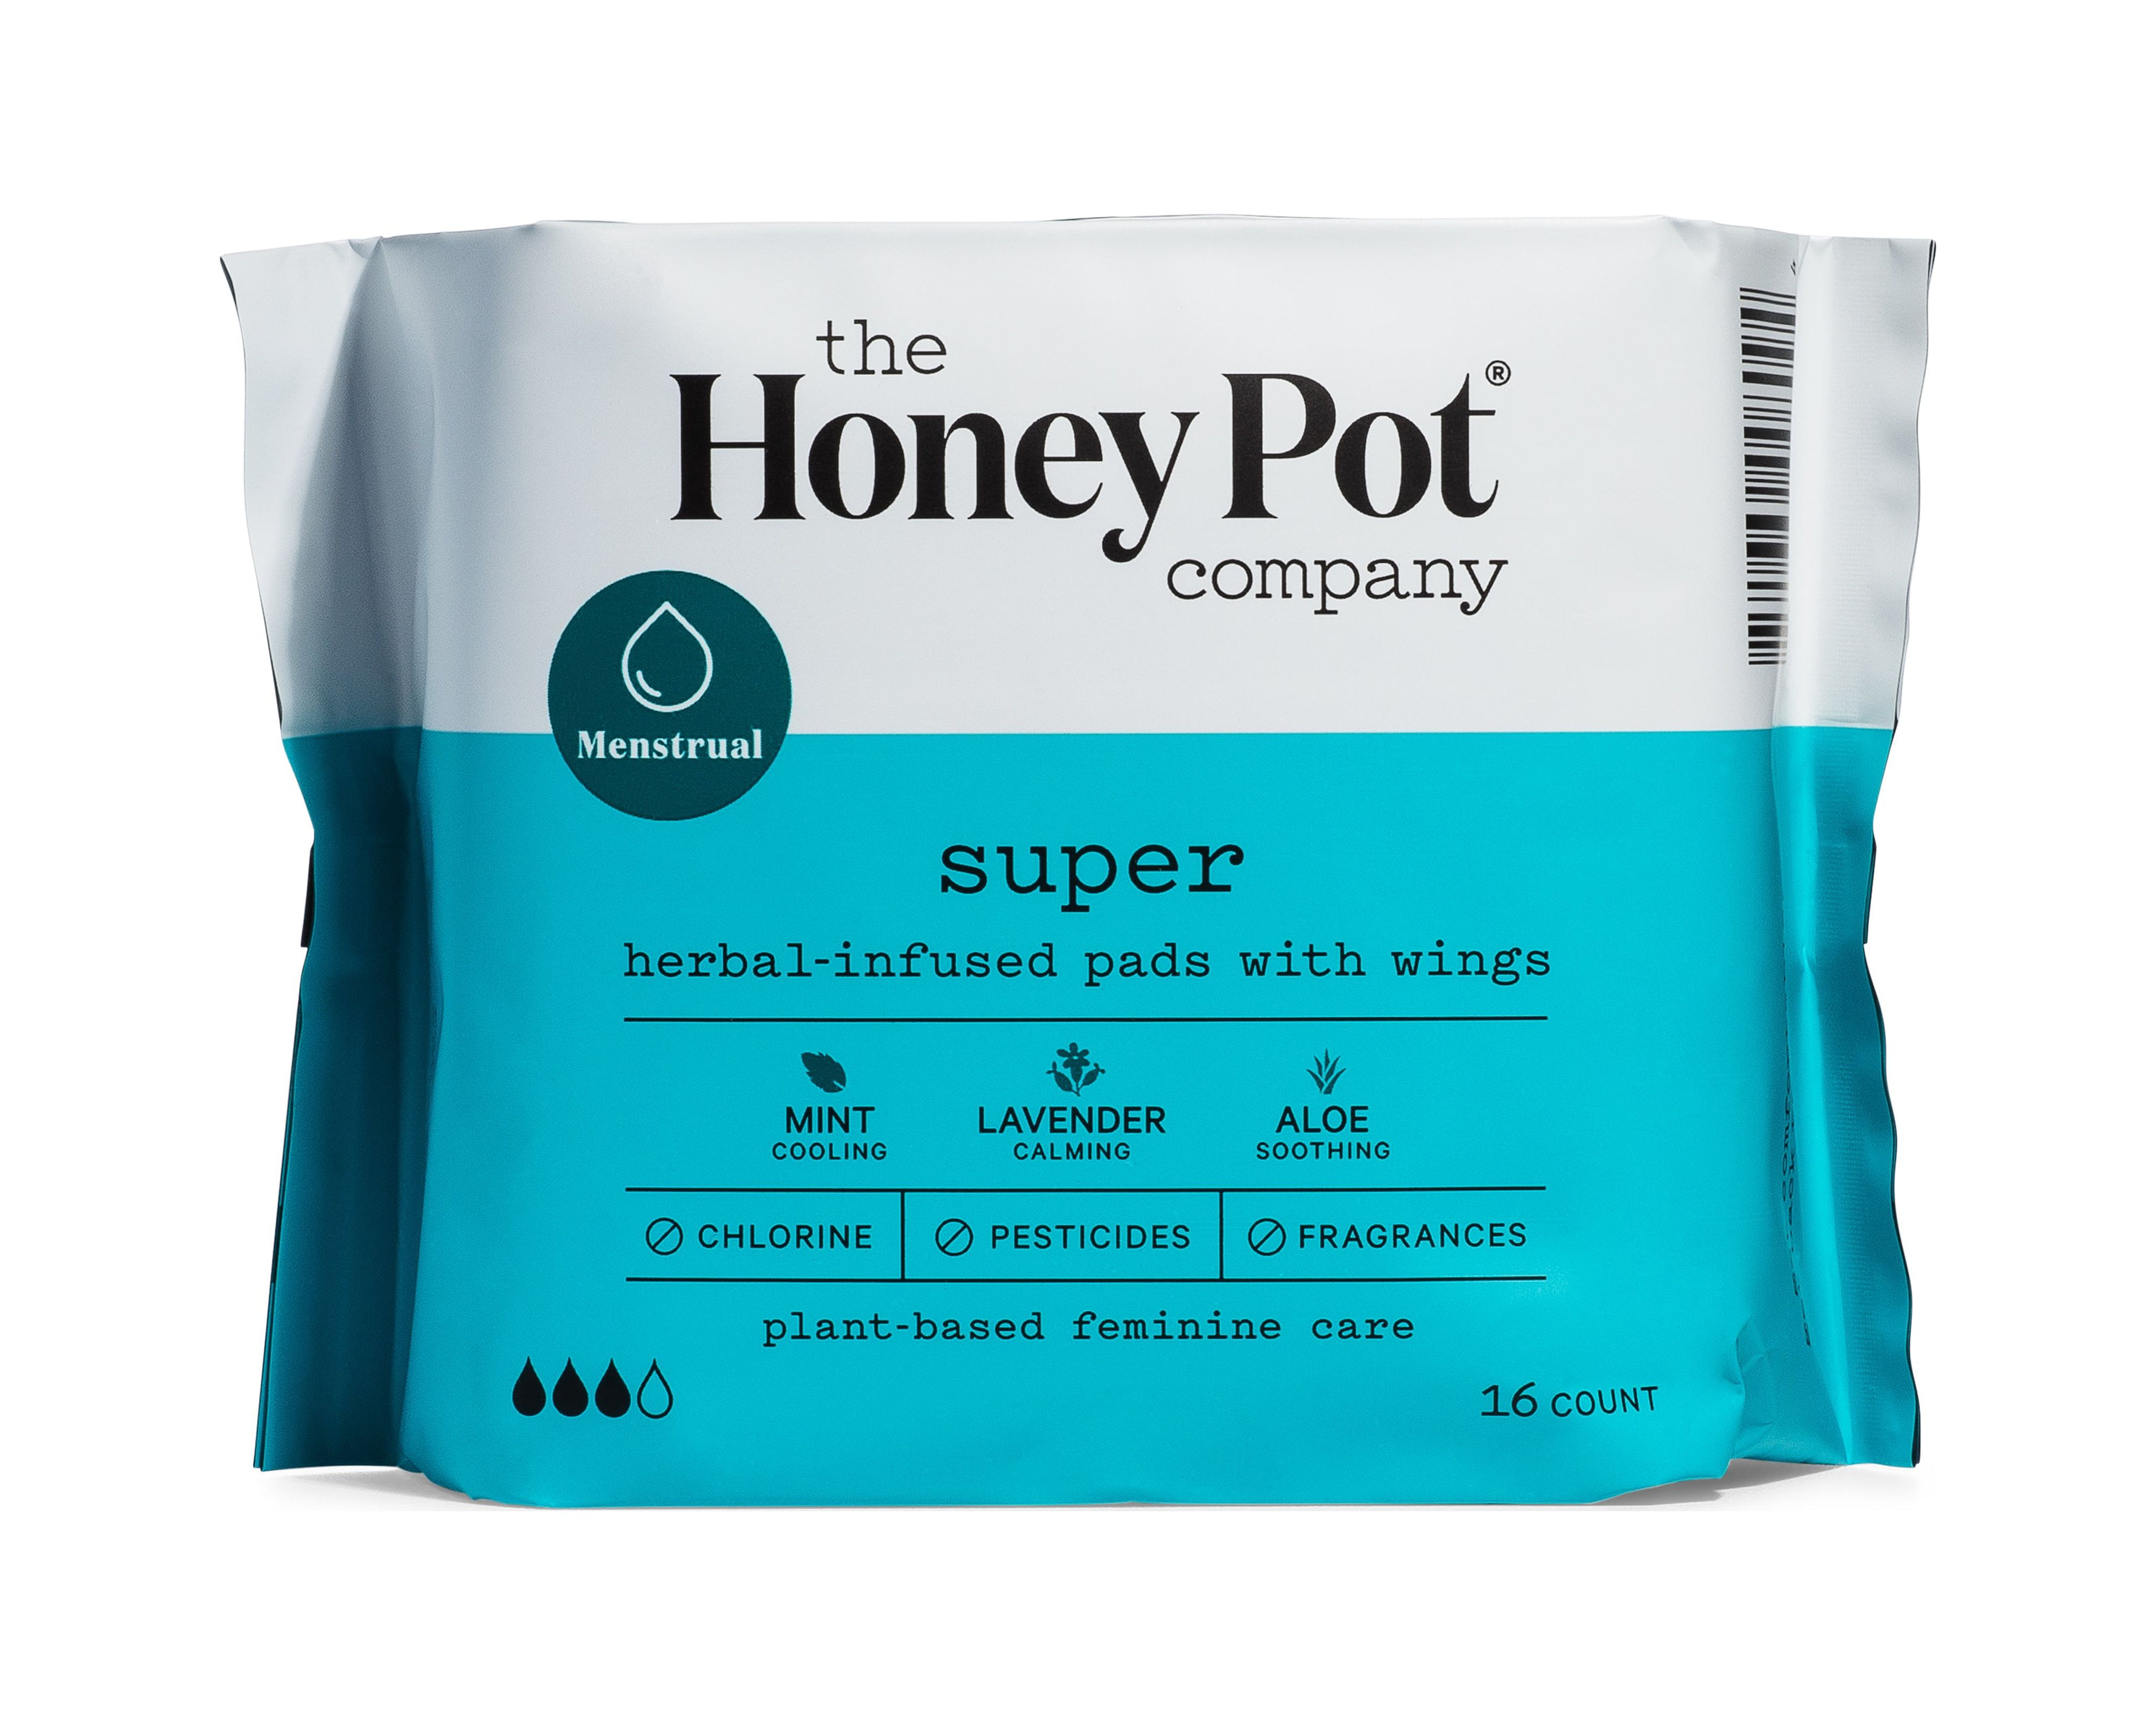 The Honey Pot Company Super Herbal Menstrual Pads with Wings, 16 Count - image 1 of 7